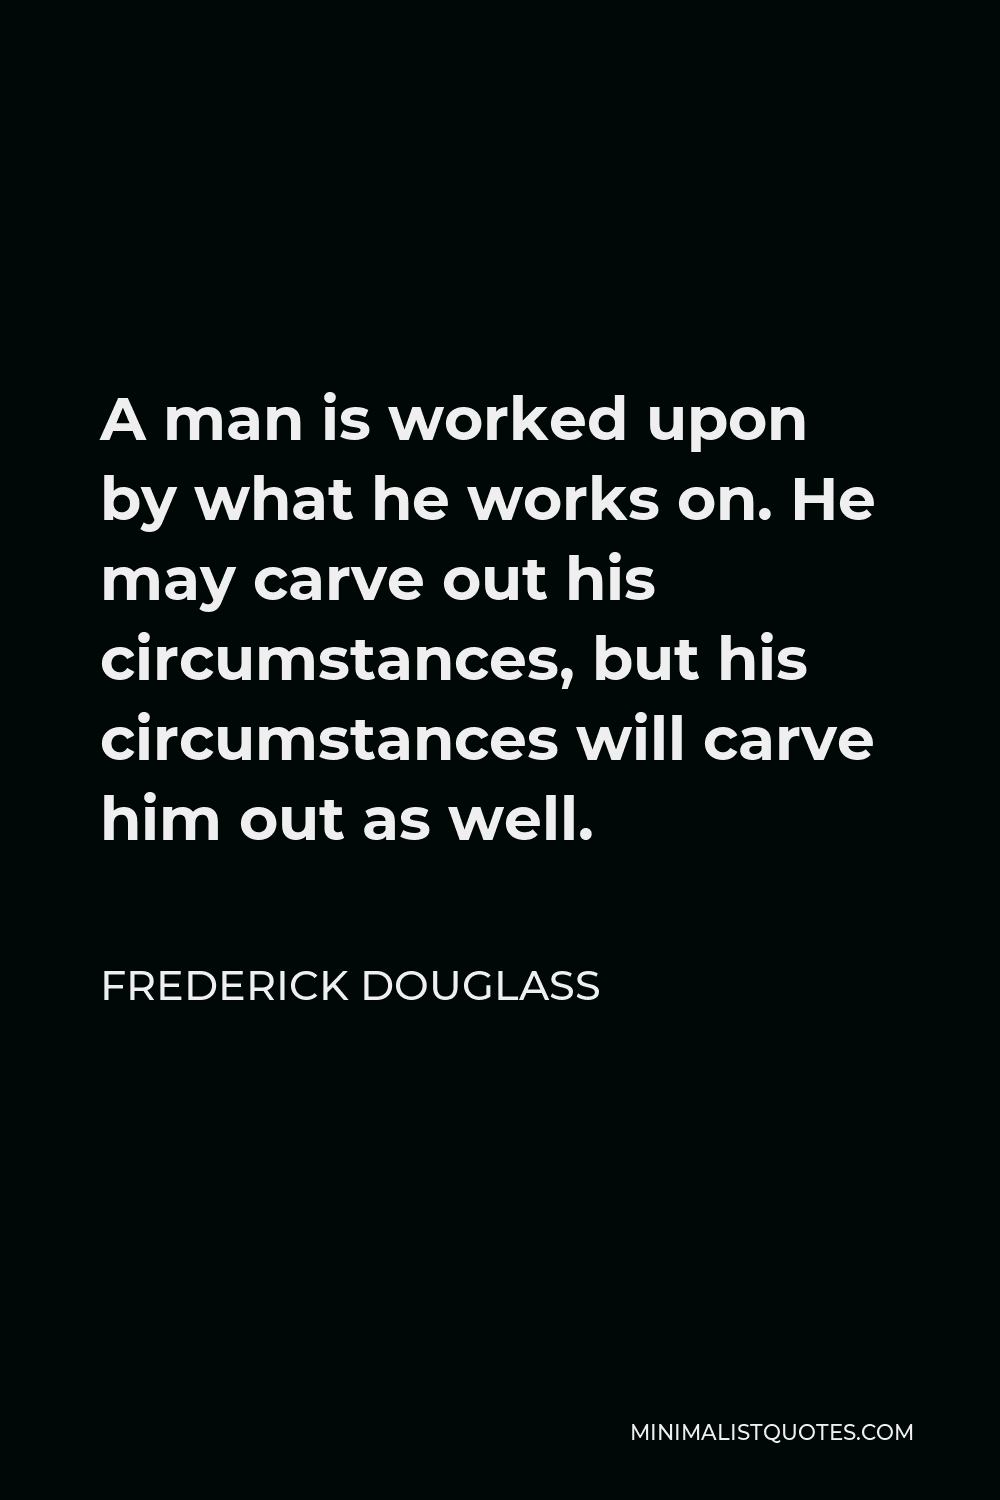 Frederick Douglass Quote: A man is worked upon by what he works on. He ...